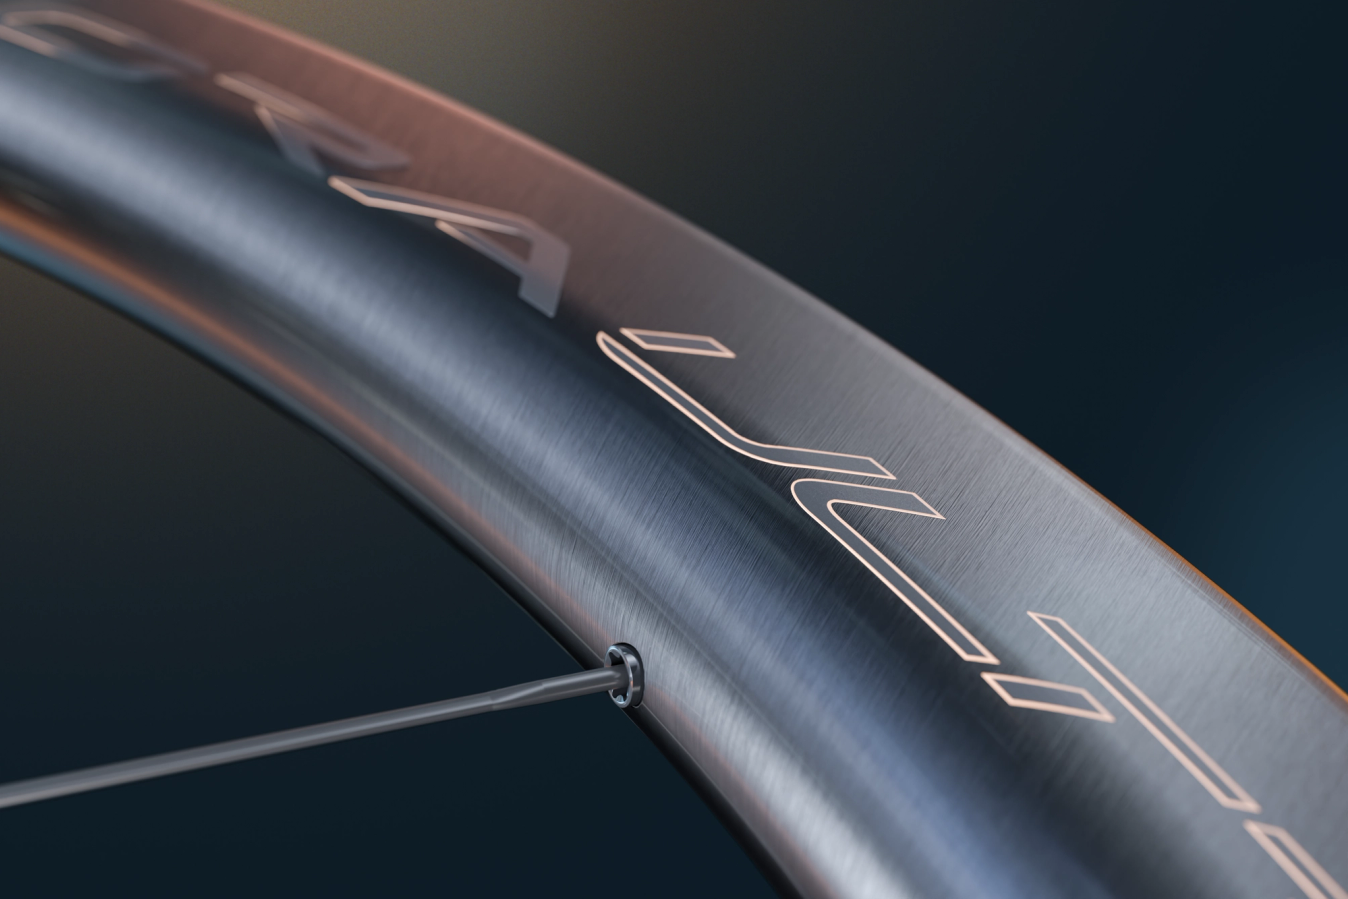 Campagnolo has used a new carbon lay-up to cut weight